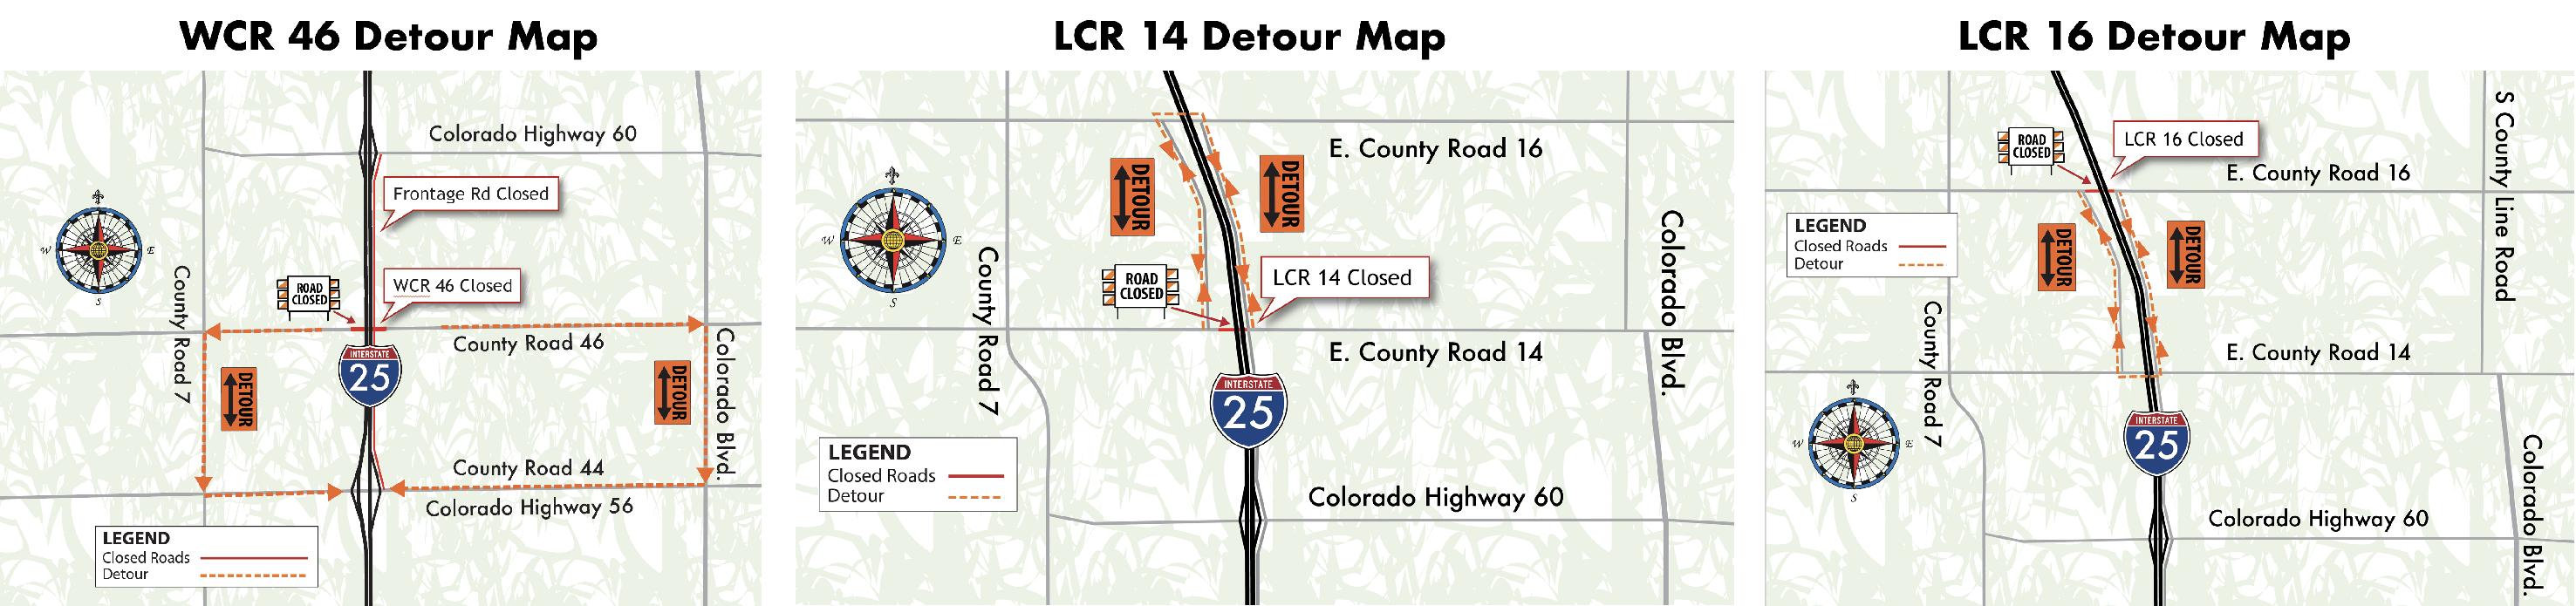 WCR 46, LCR 14 and LCR 16 Project Map detail image